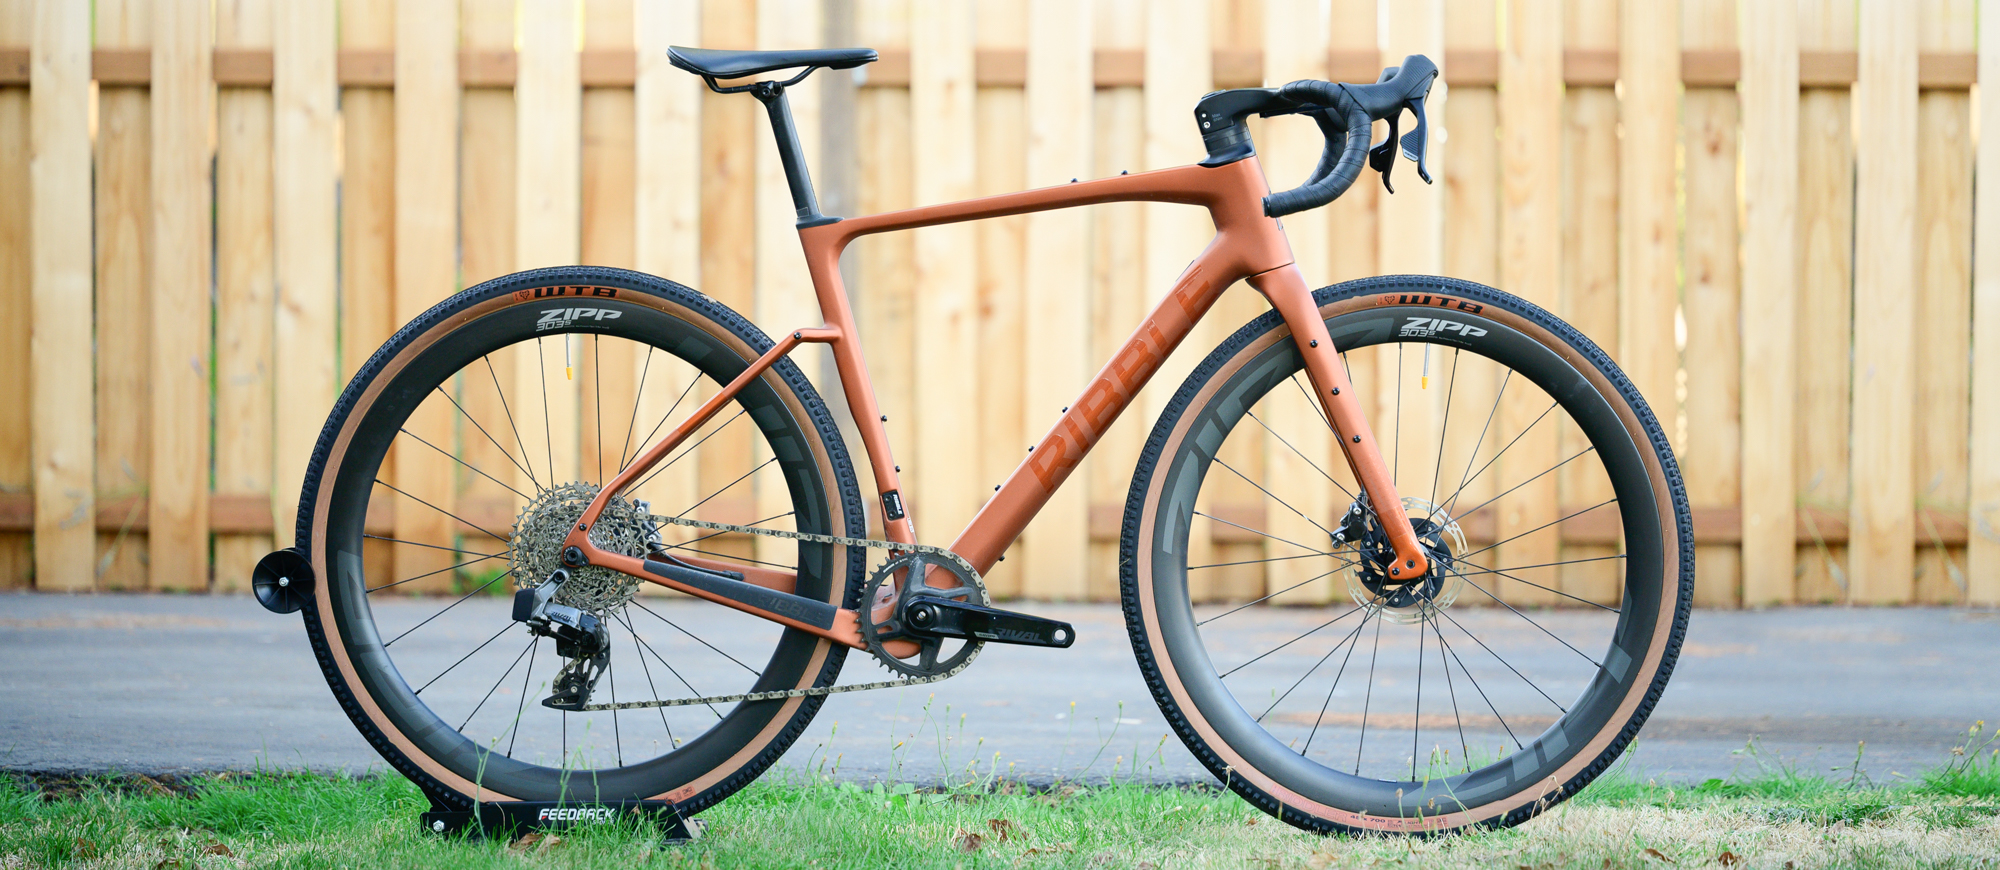 Ribble Gravel SL long term review: a solid all-around bike for a